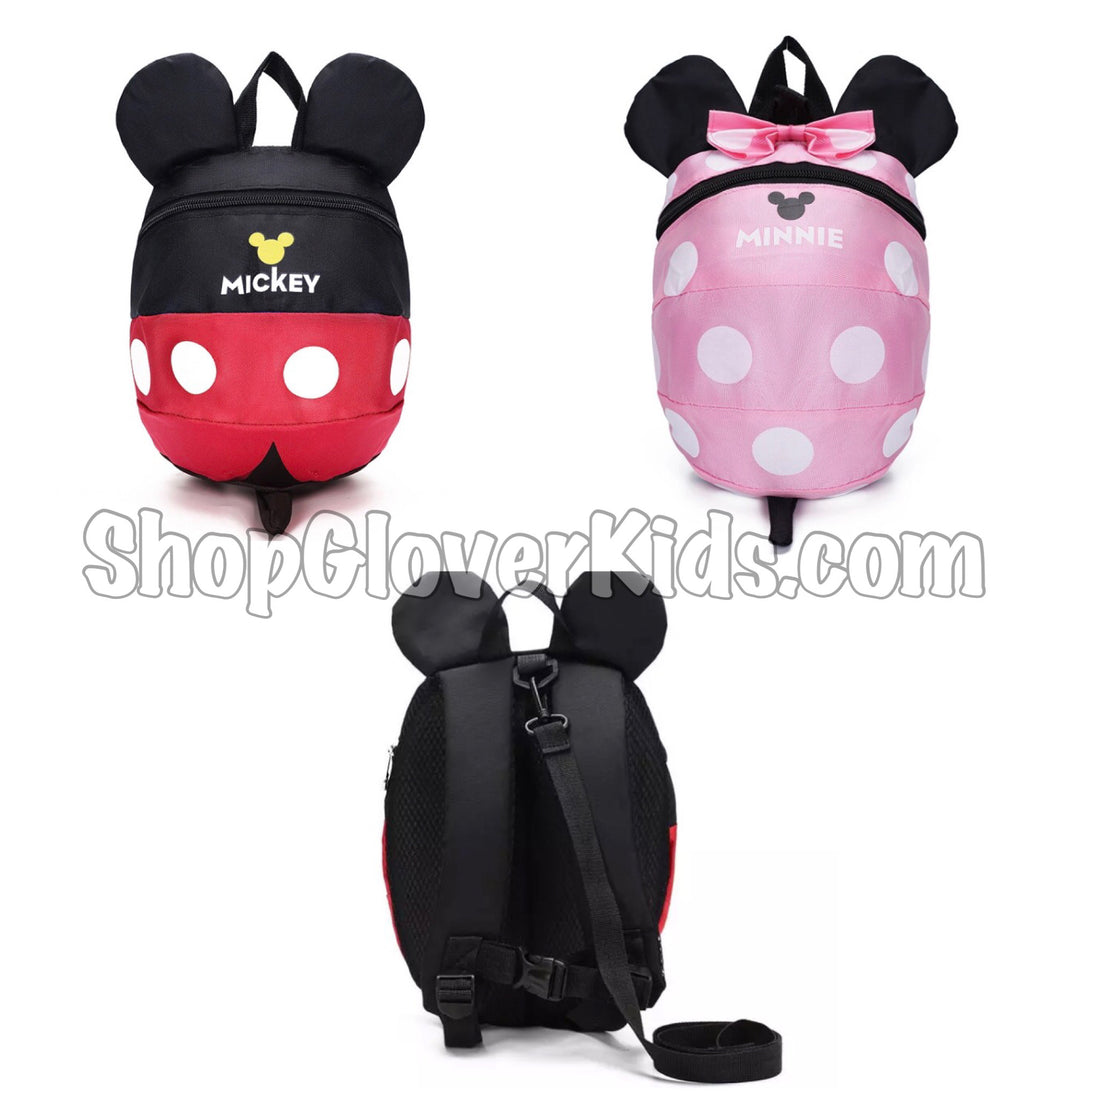 Just added! Mickey and Minnie Backpacks!